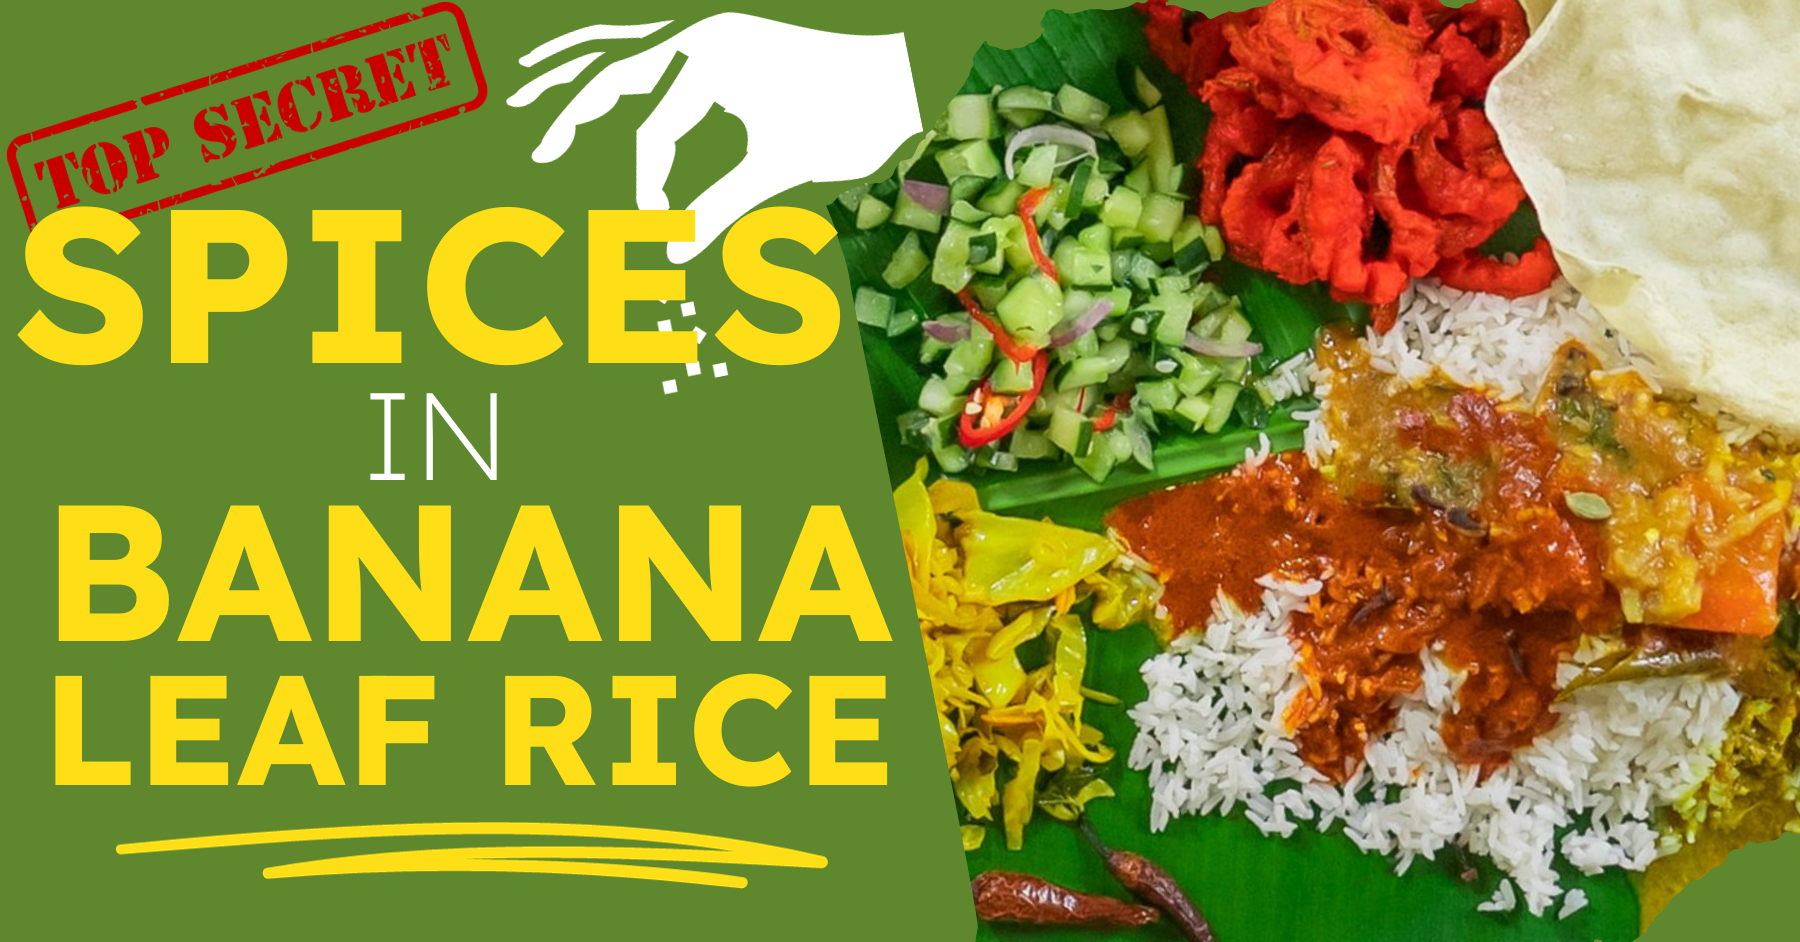 The Essential Spices That Make Banana Leaf Rice So Delicious